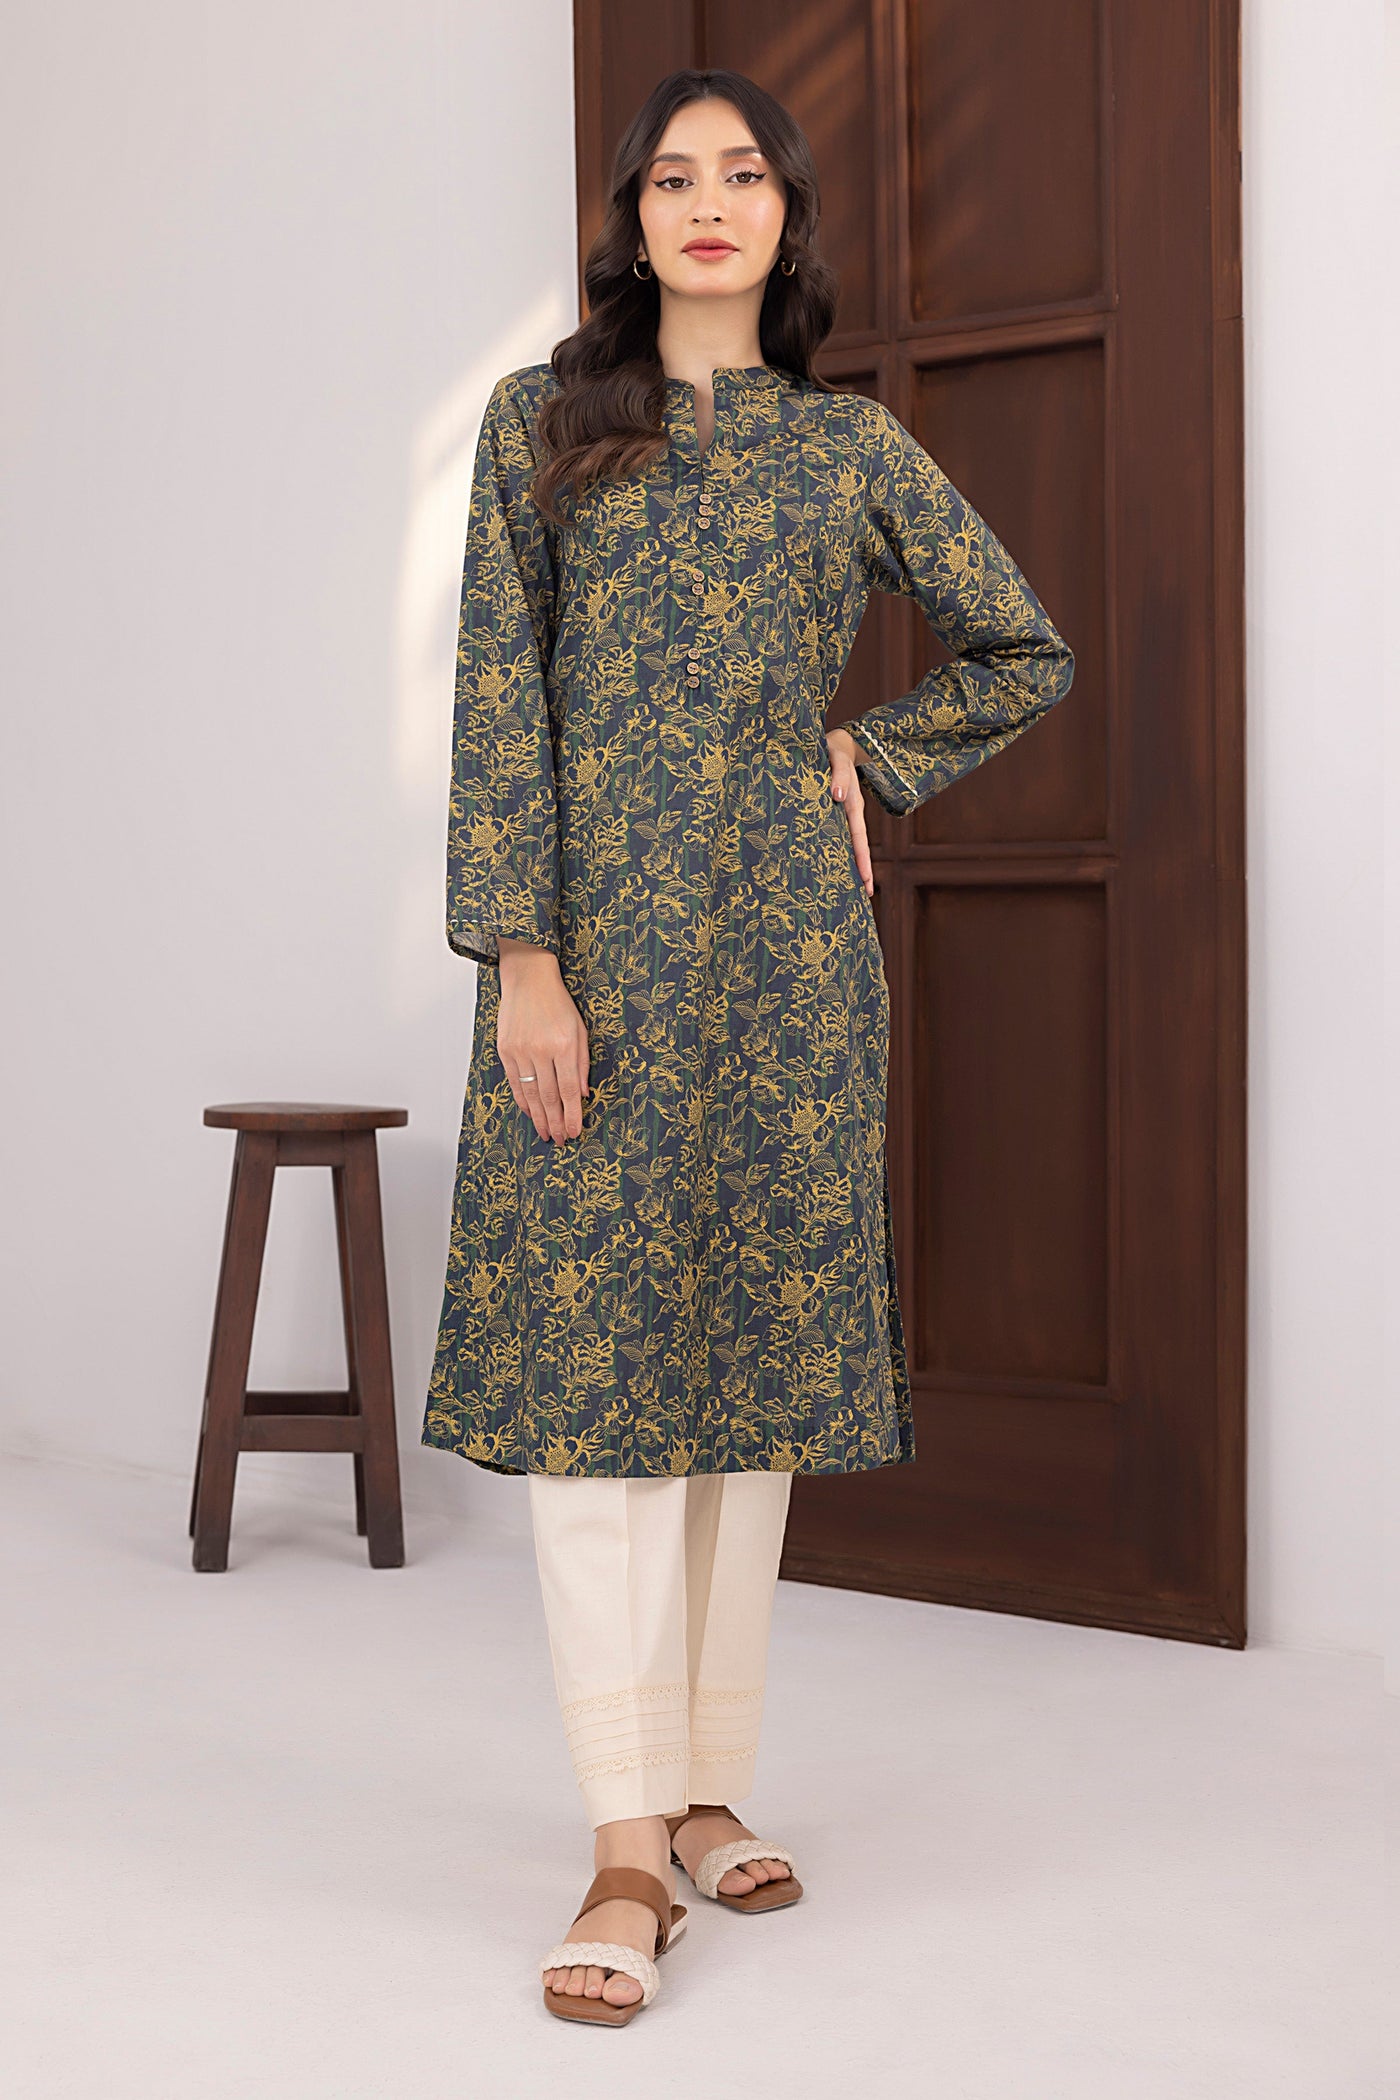 Lakhany 01 Piece Ready to Wear Printed Cambric Shirt - LG-RM-0042